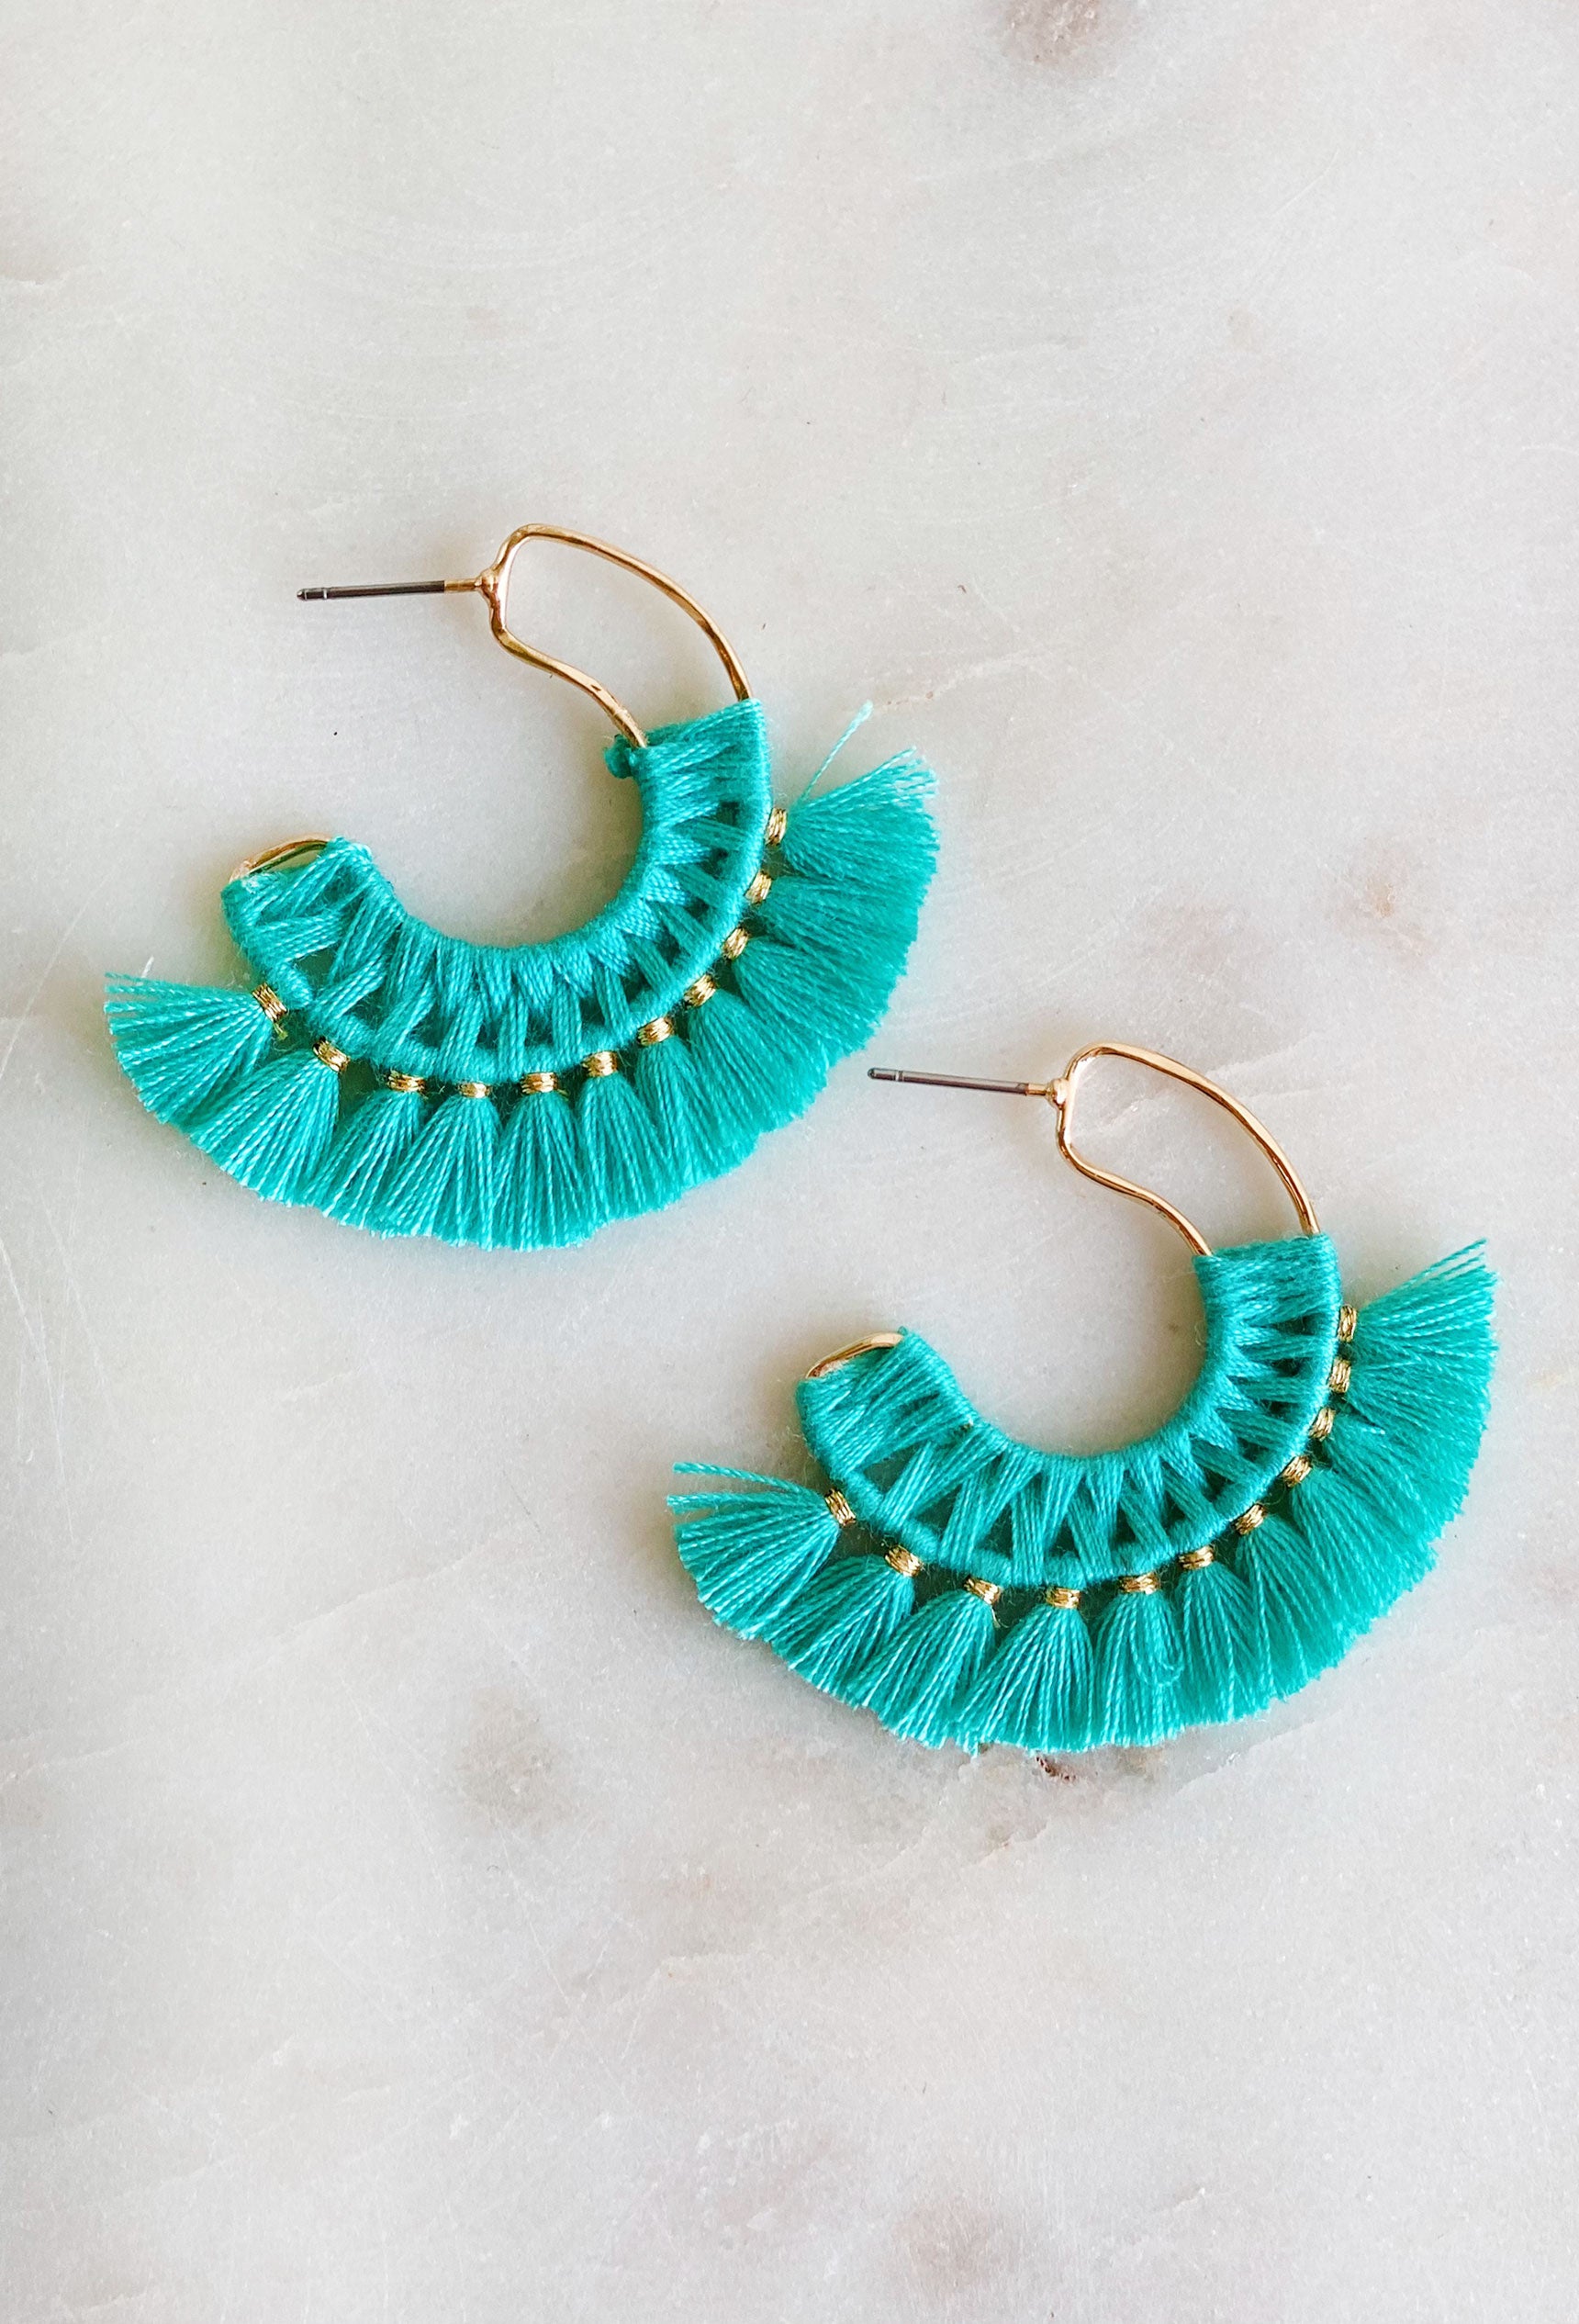 Miss Me Earrings in Turquoise, gold hoop with turquoise fringe